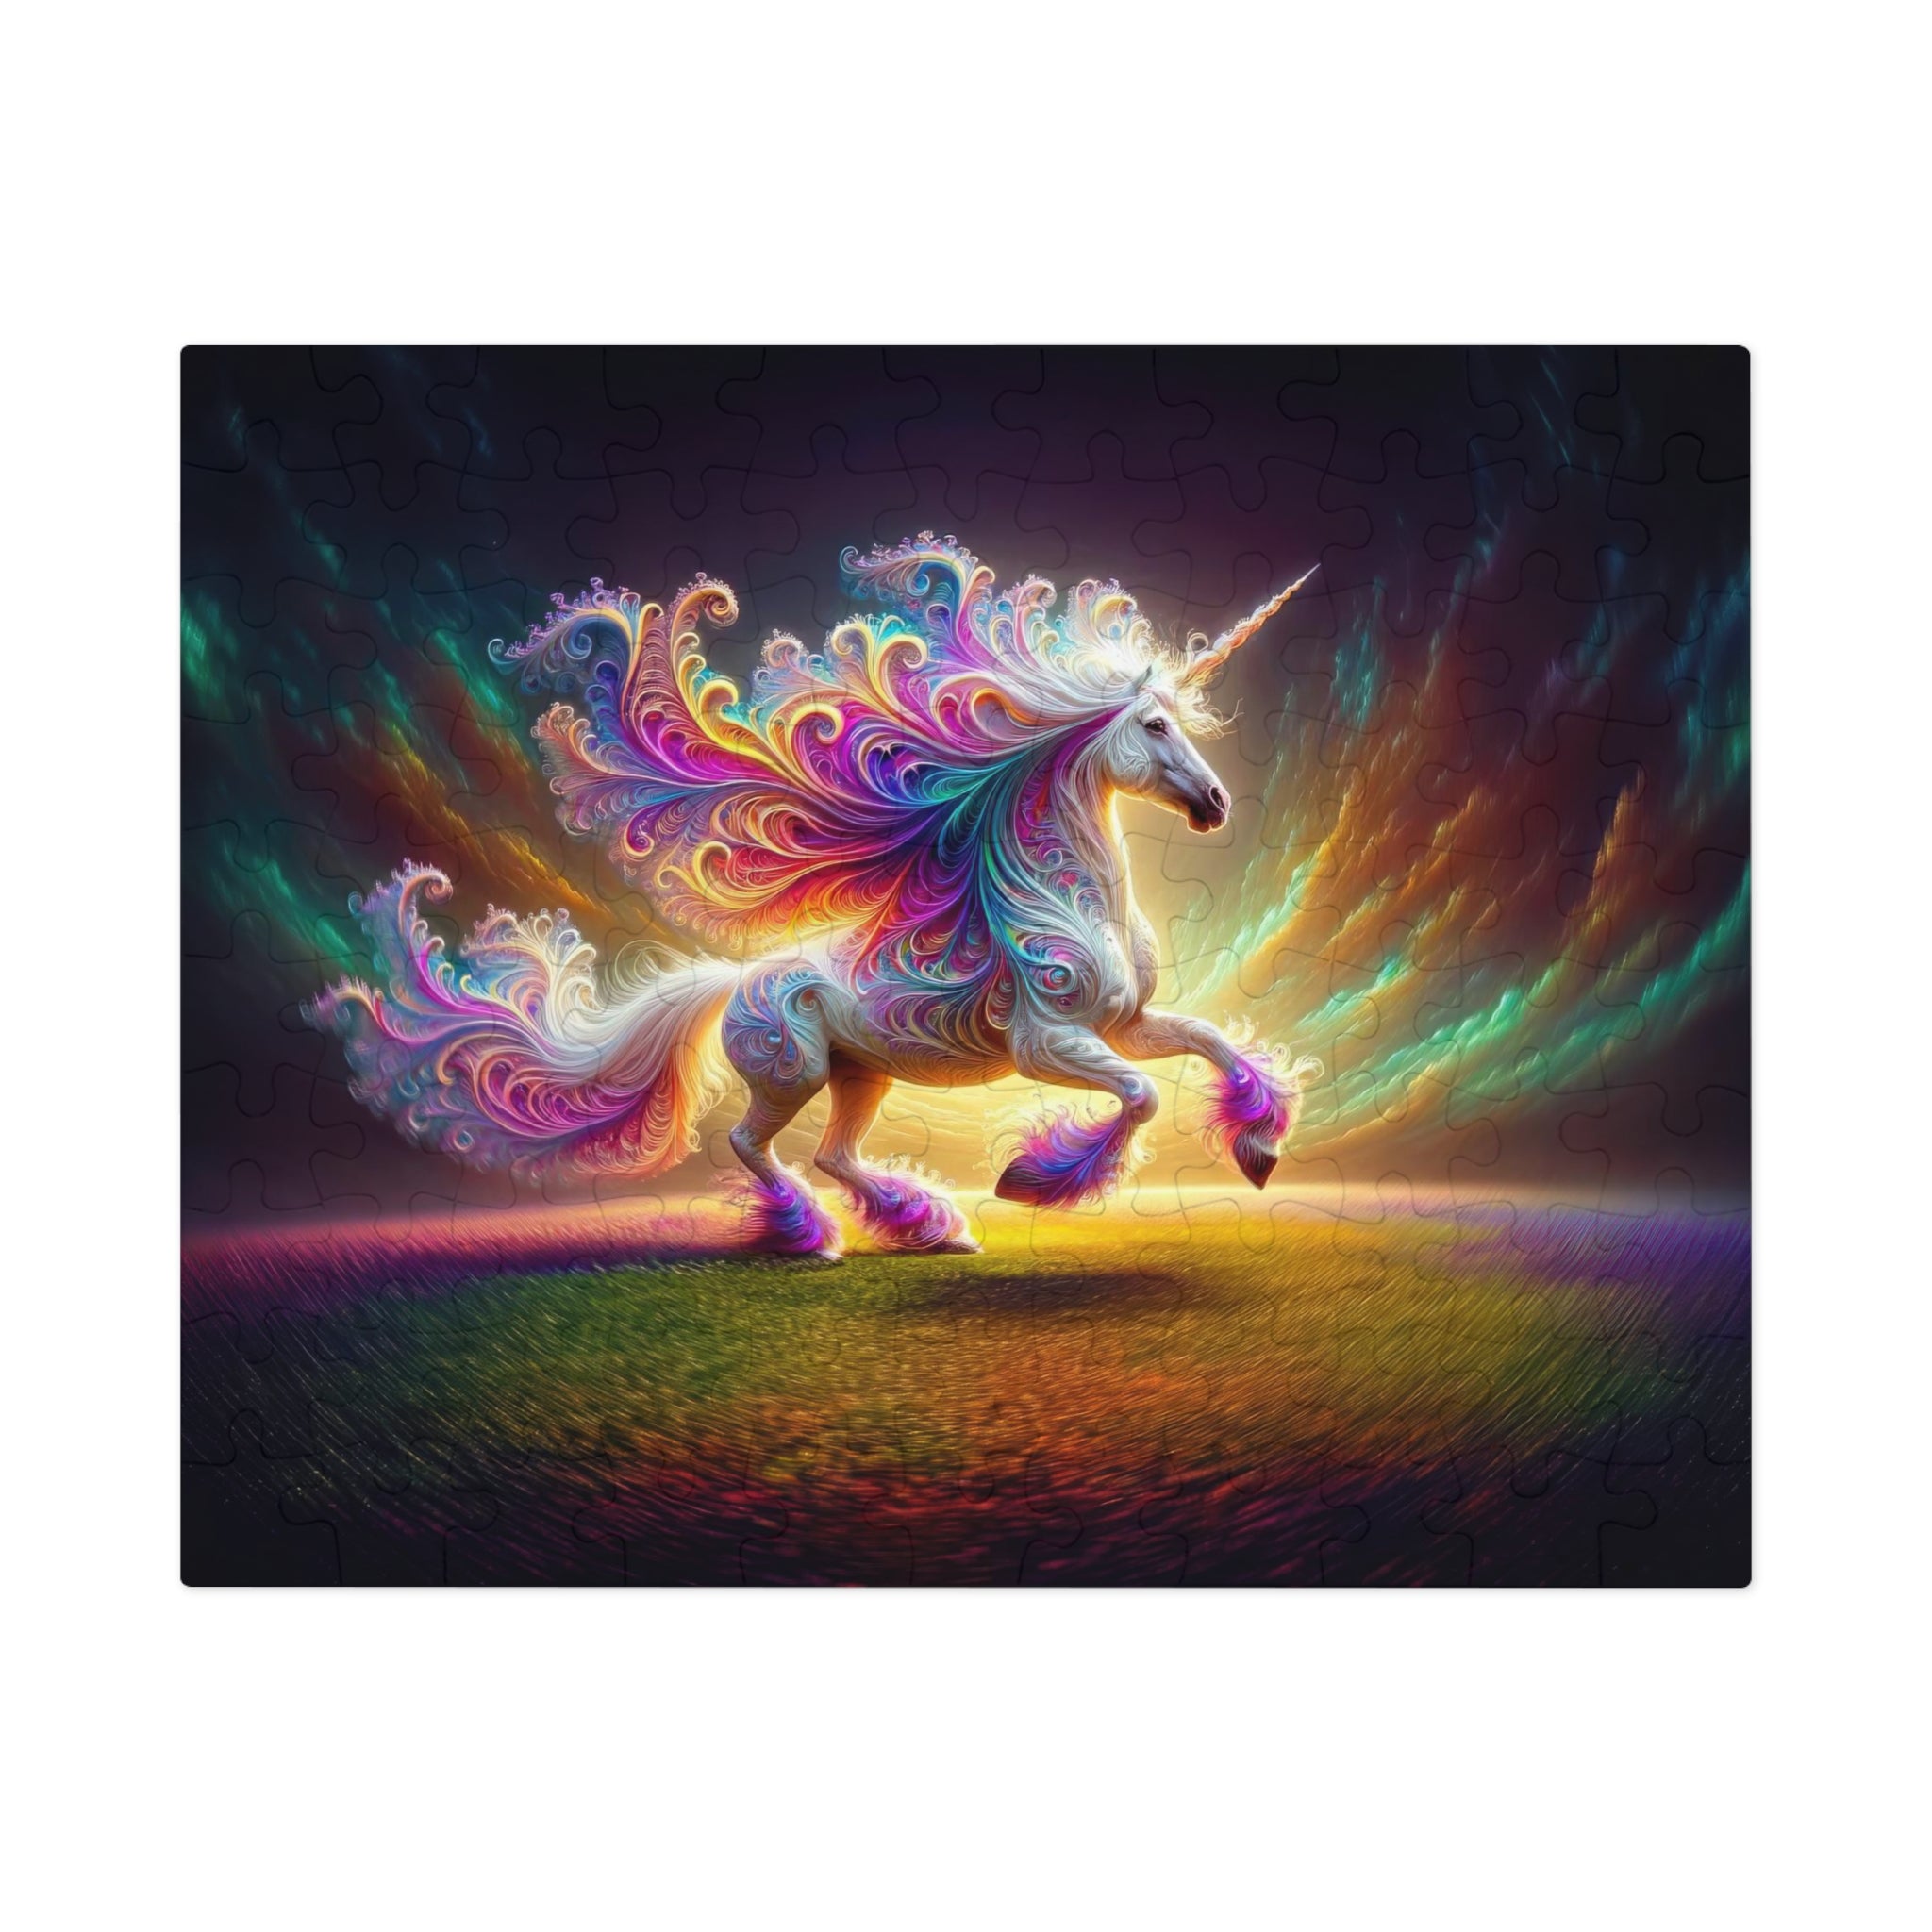 The Unicorn's Realm Jigsaw Puzzle